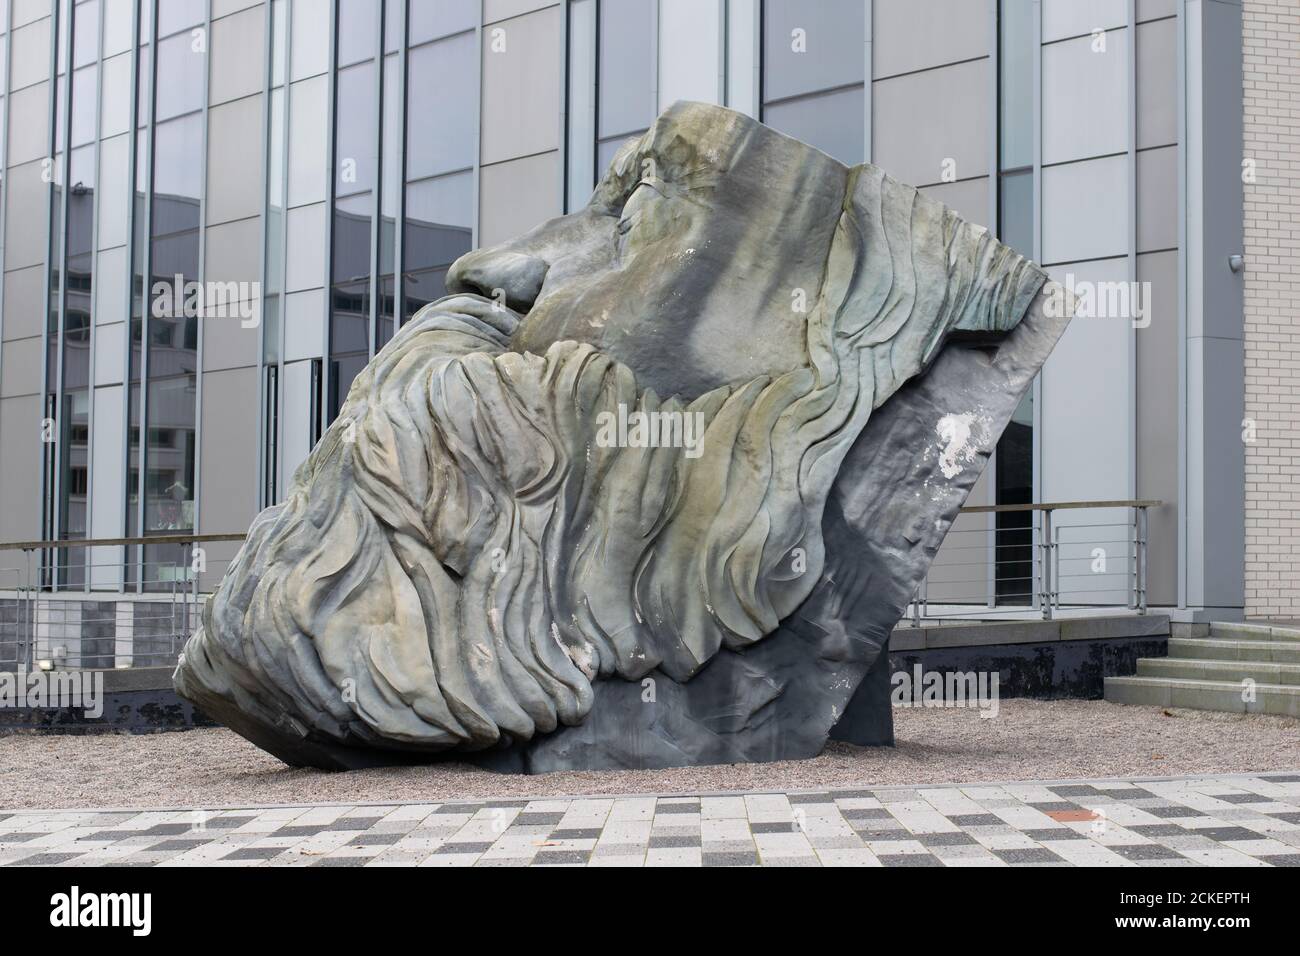 Salford University, Greater Manchester, UK. Statue of Frederich Engels, philosopher on the main university campus. Stock Photo